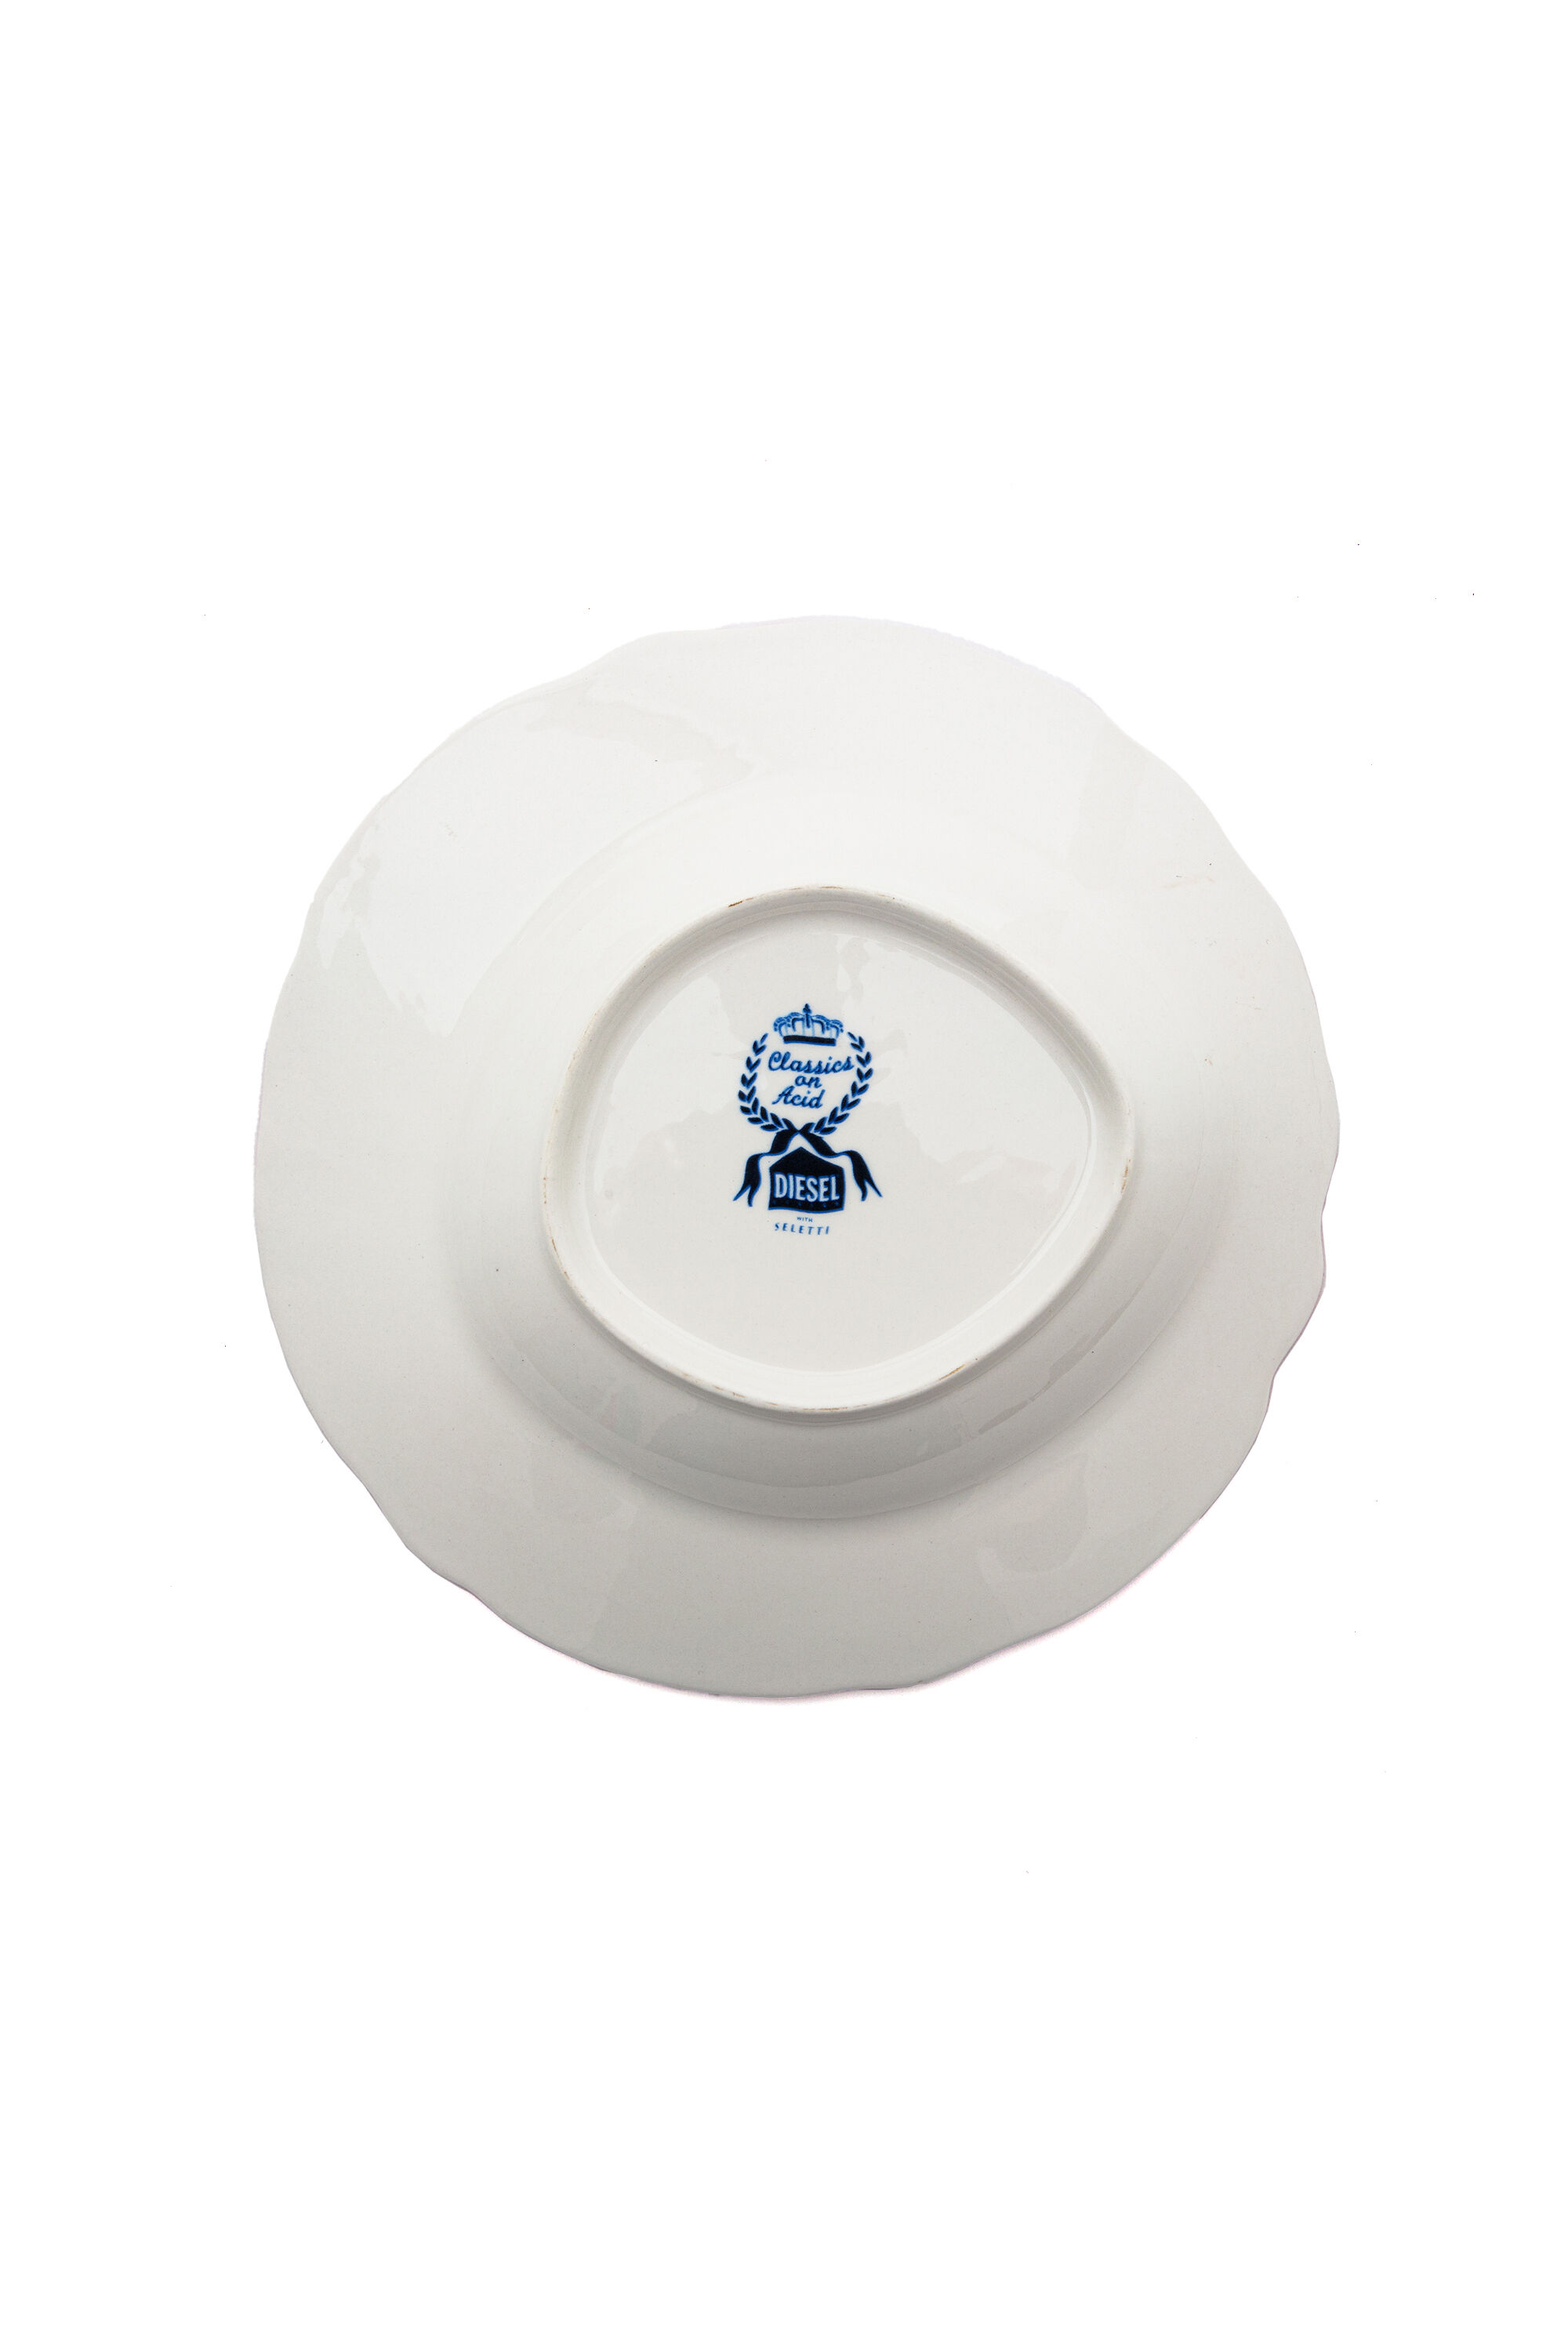 Diesel - 11220 SOUP PLATE IN PORCELAIN "CLASSIC O, Weiss/Blau - Image 2